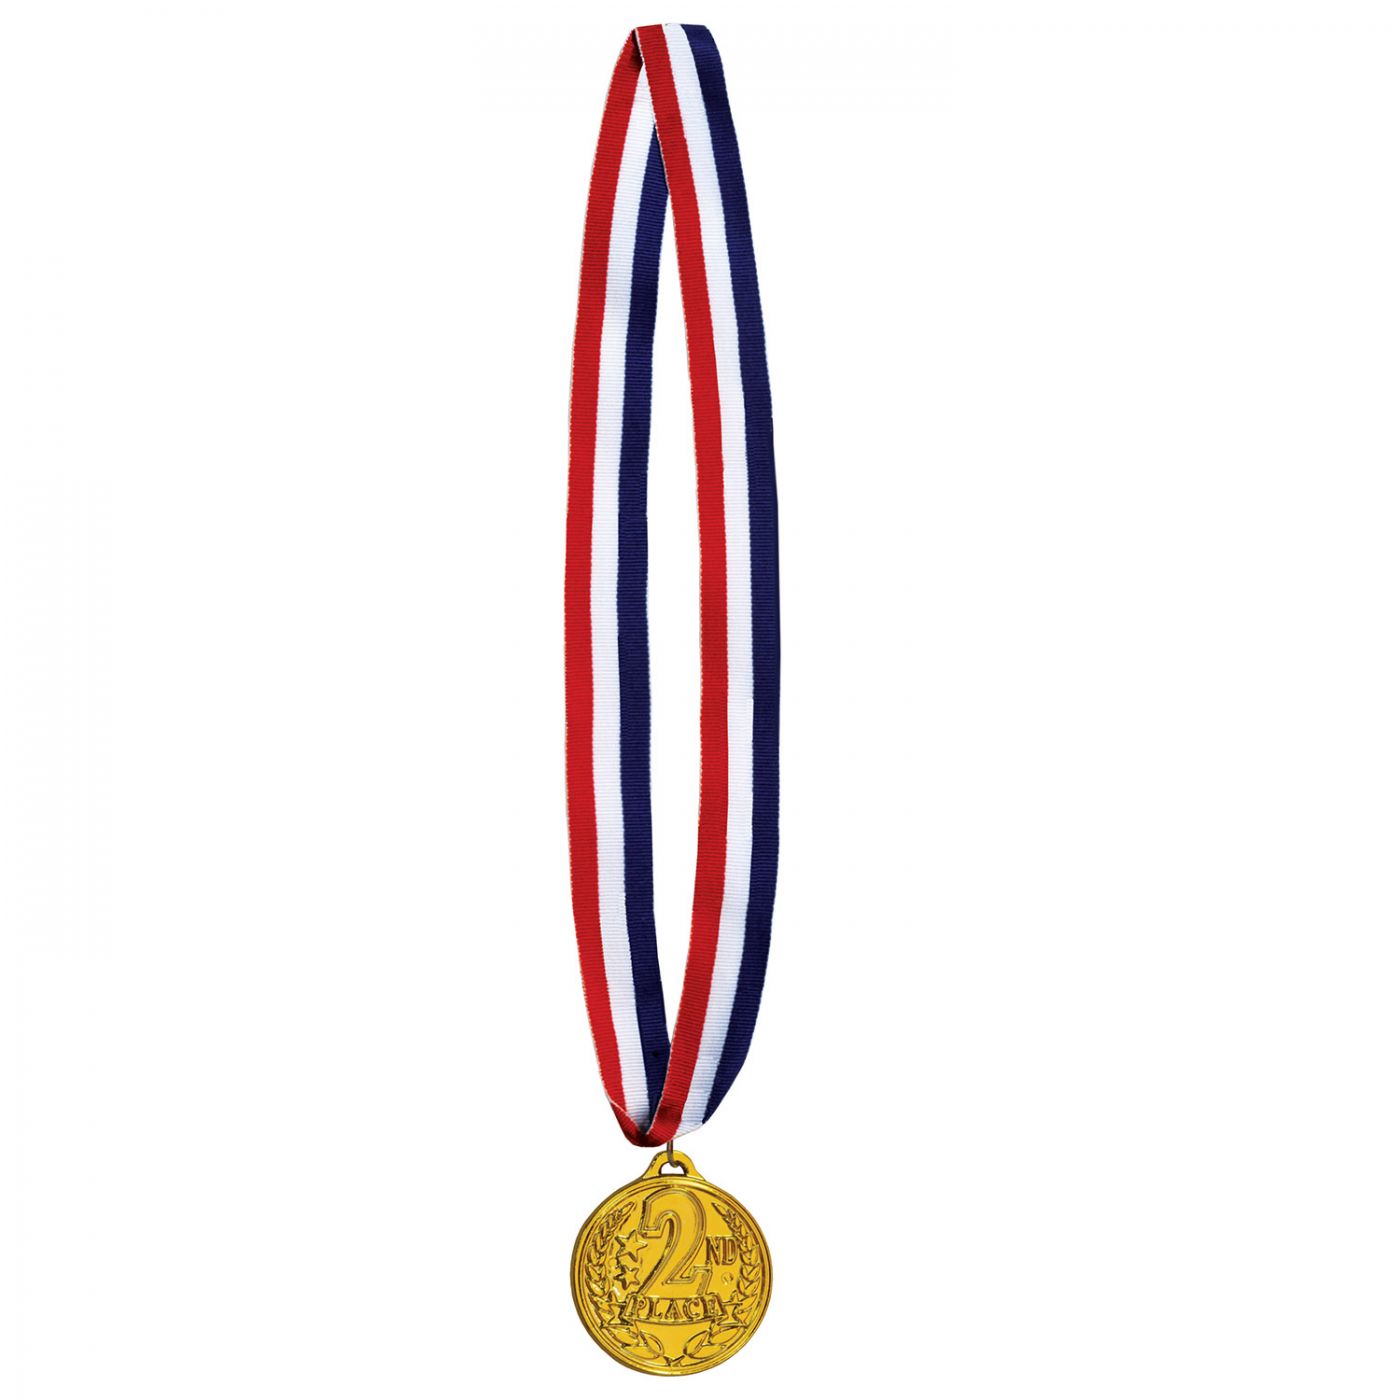 Image of 2nd Place Medal w/Ribbon (12)